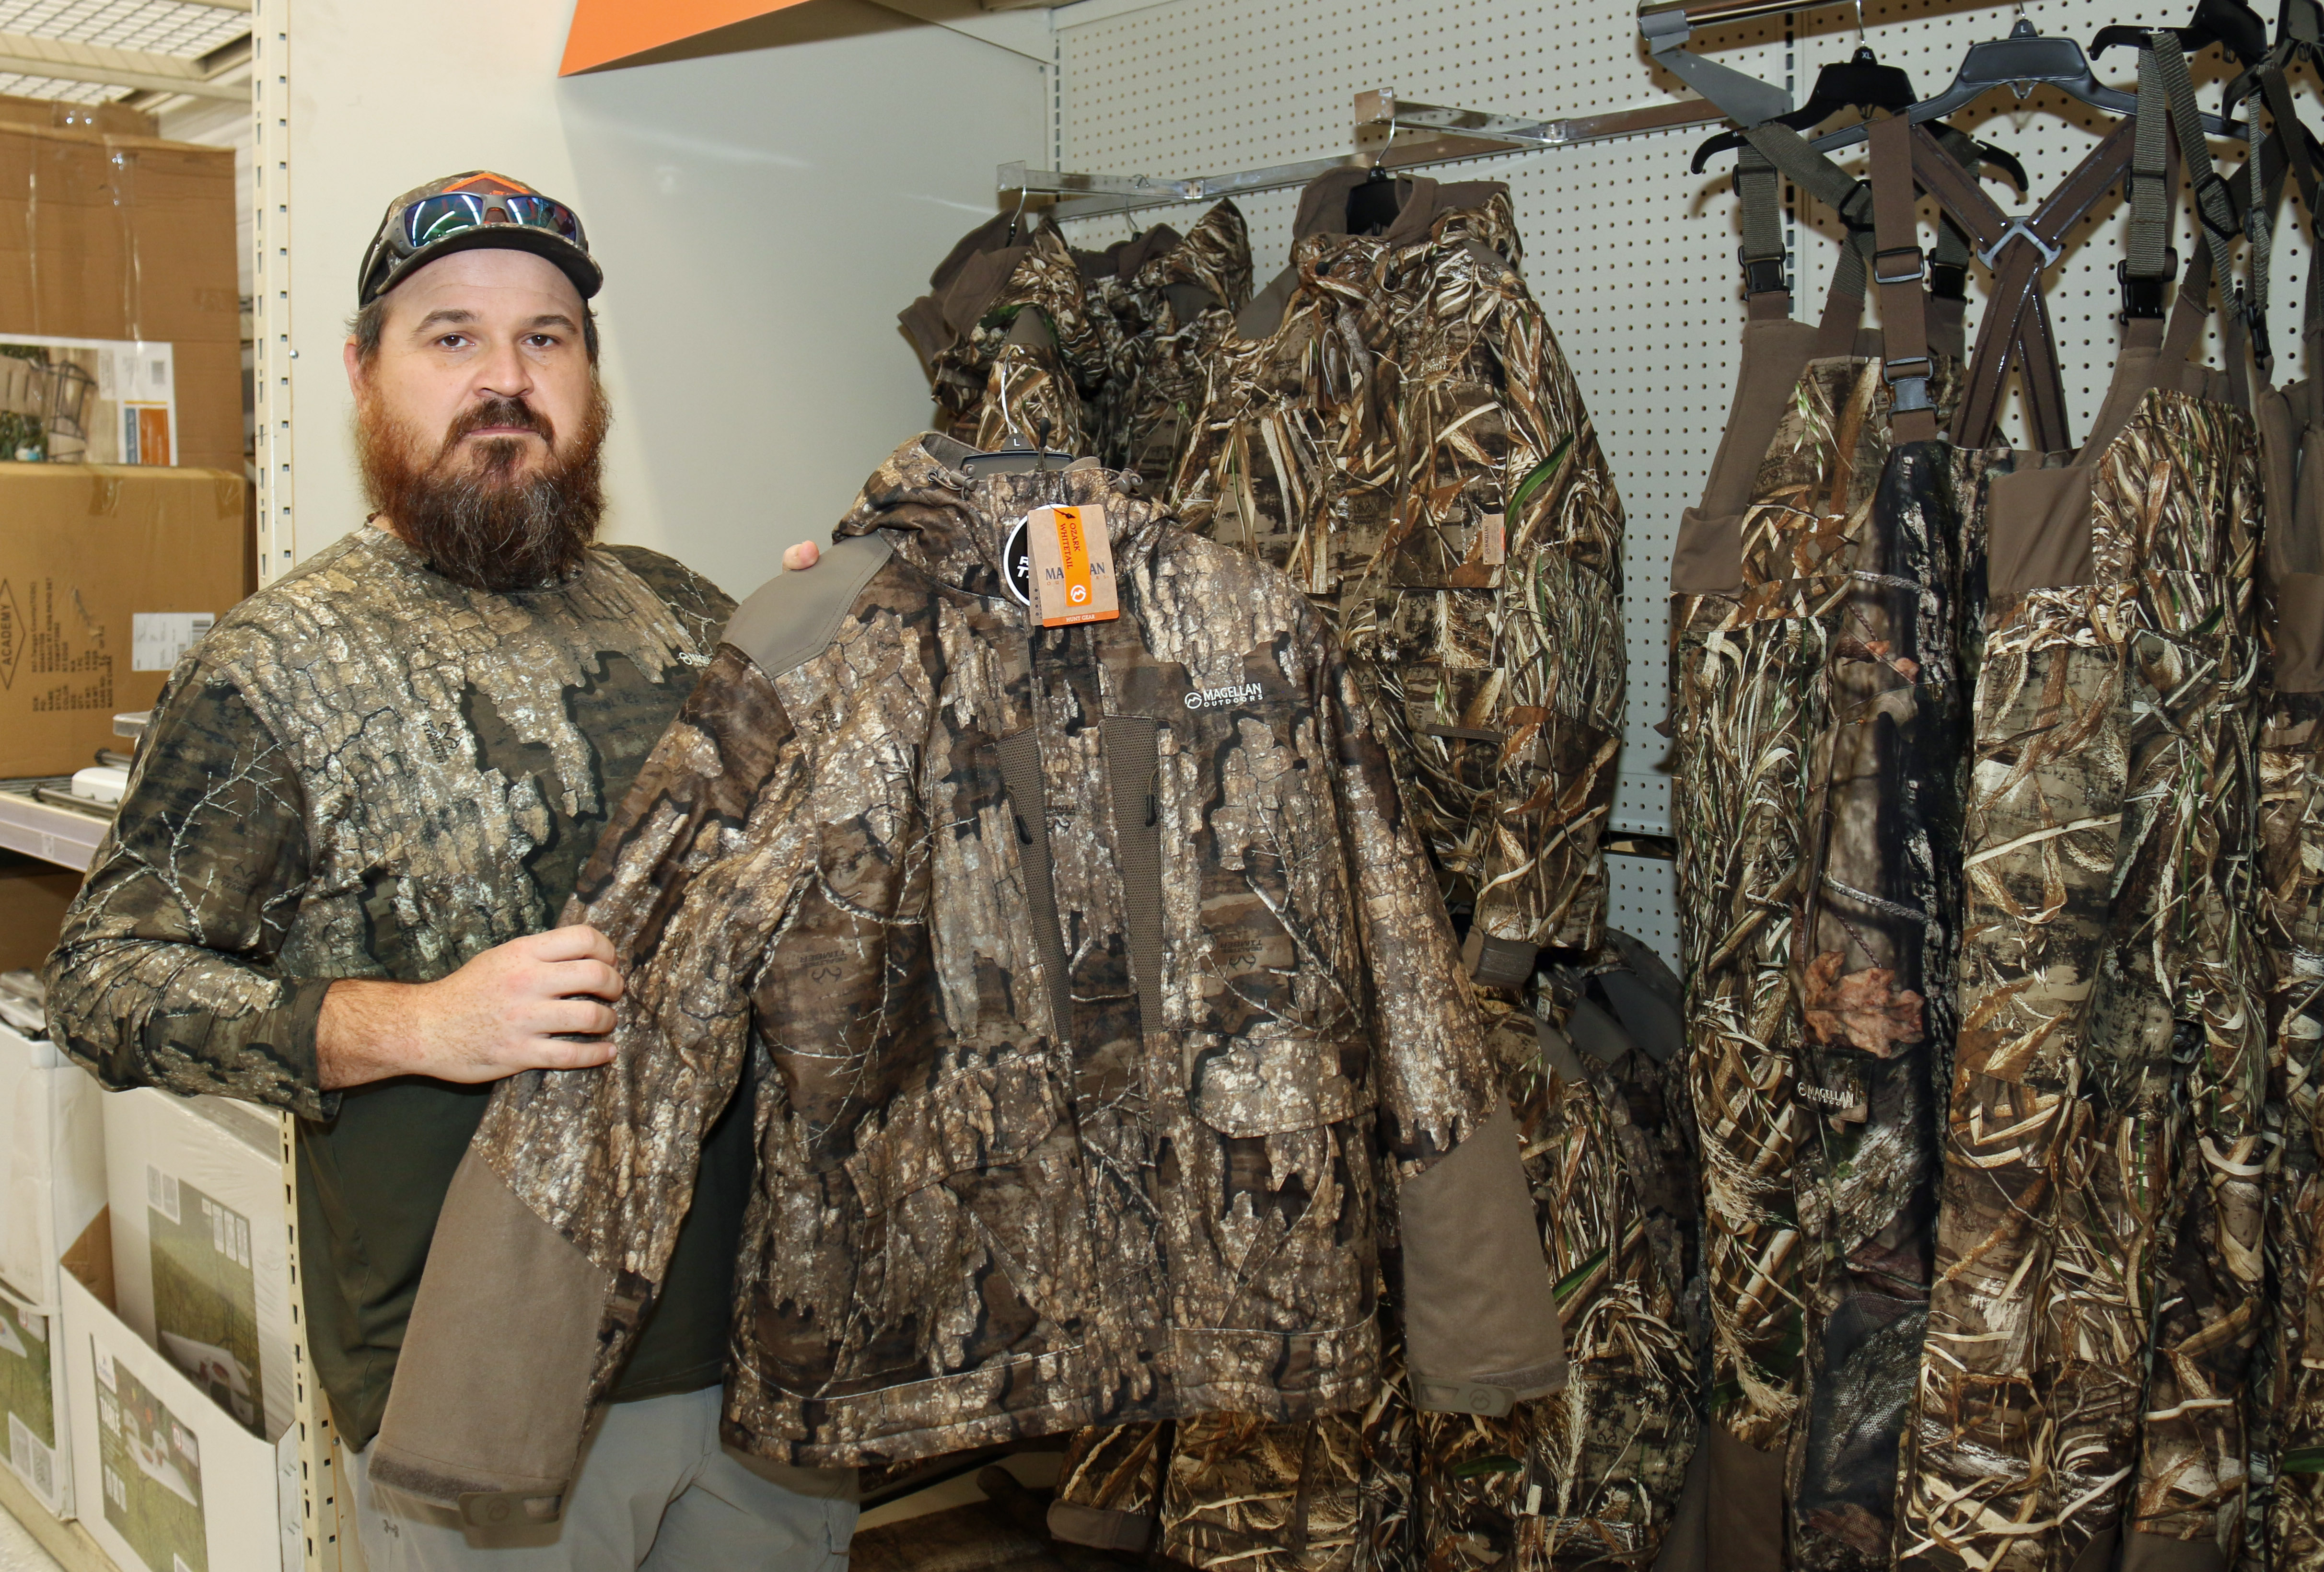  You can't go wrong with quality clothing as a gift ideas for outdoorsman. 